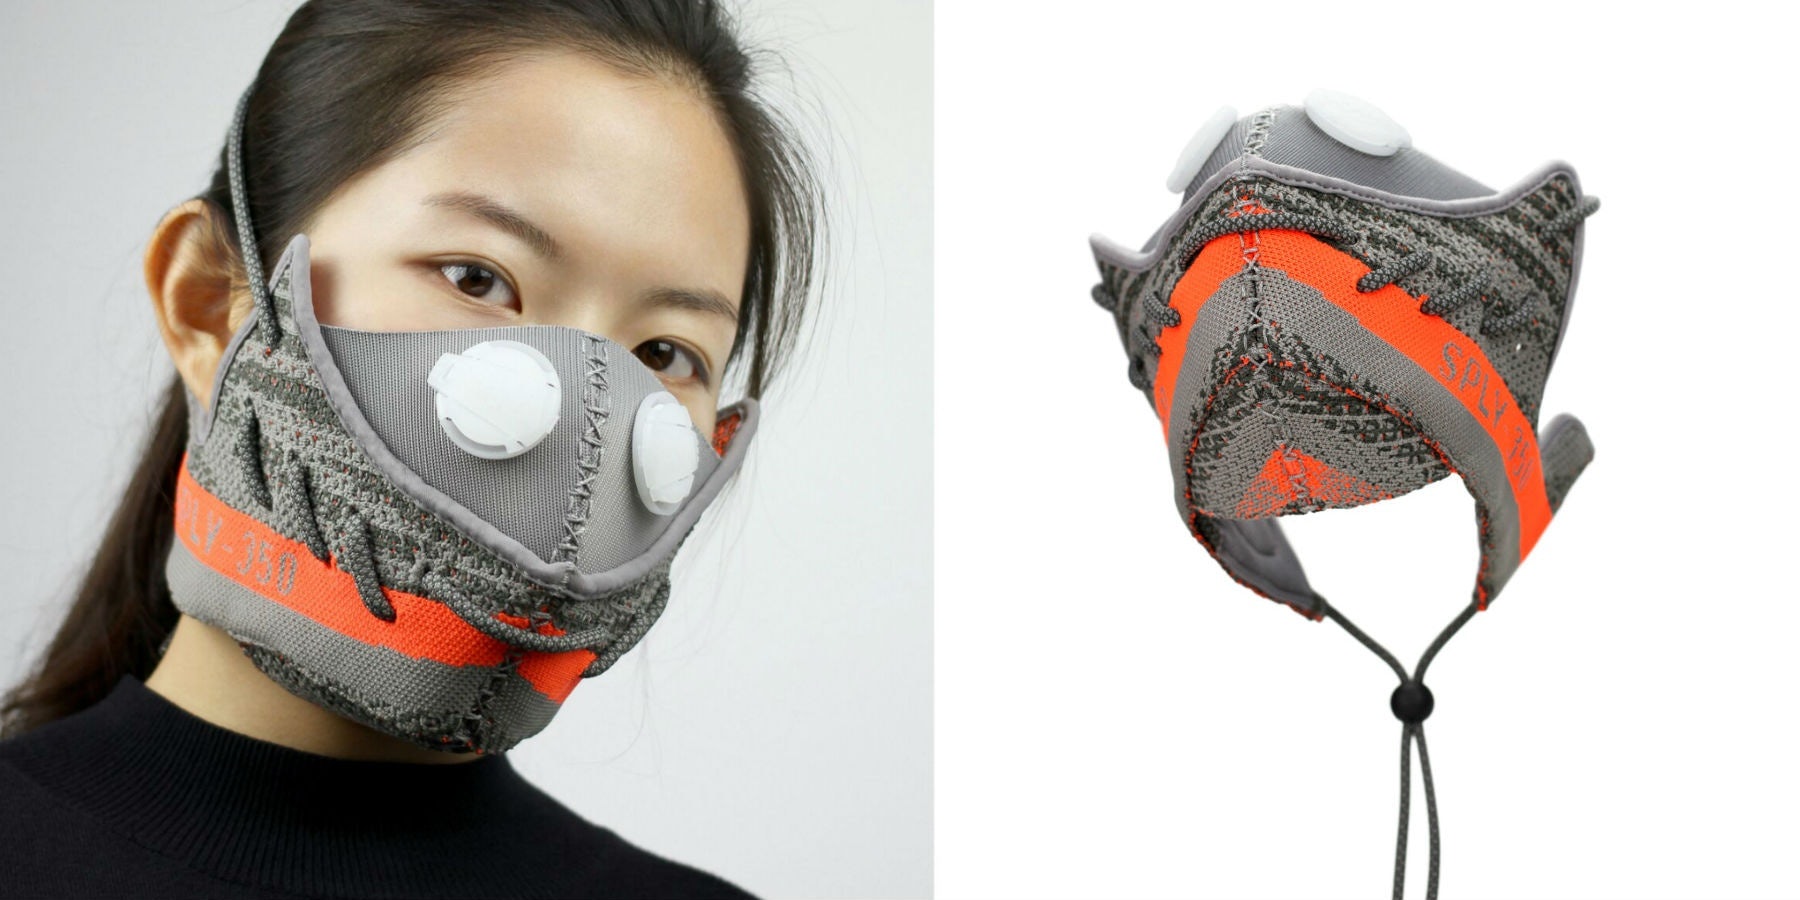 Beijing-based designer Zhijun Wang turned heads when he created an air filter mask from Yeezy Boost 350 V2 sneakers. (Courtesy Photos)